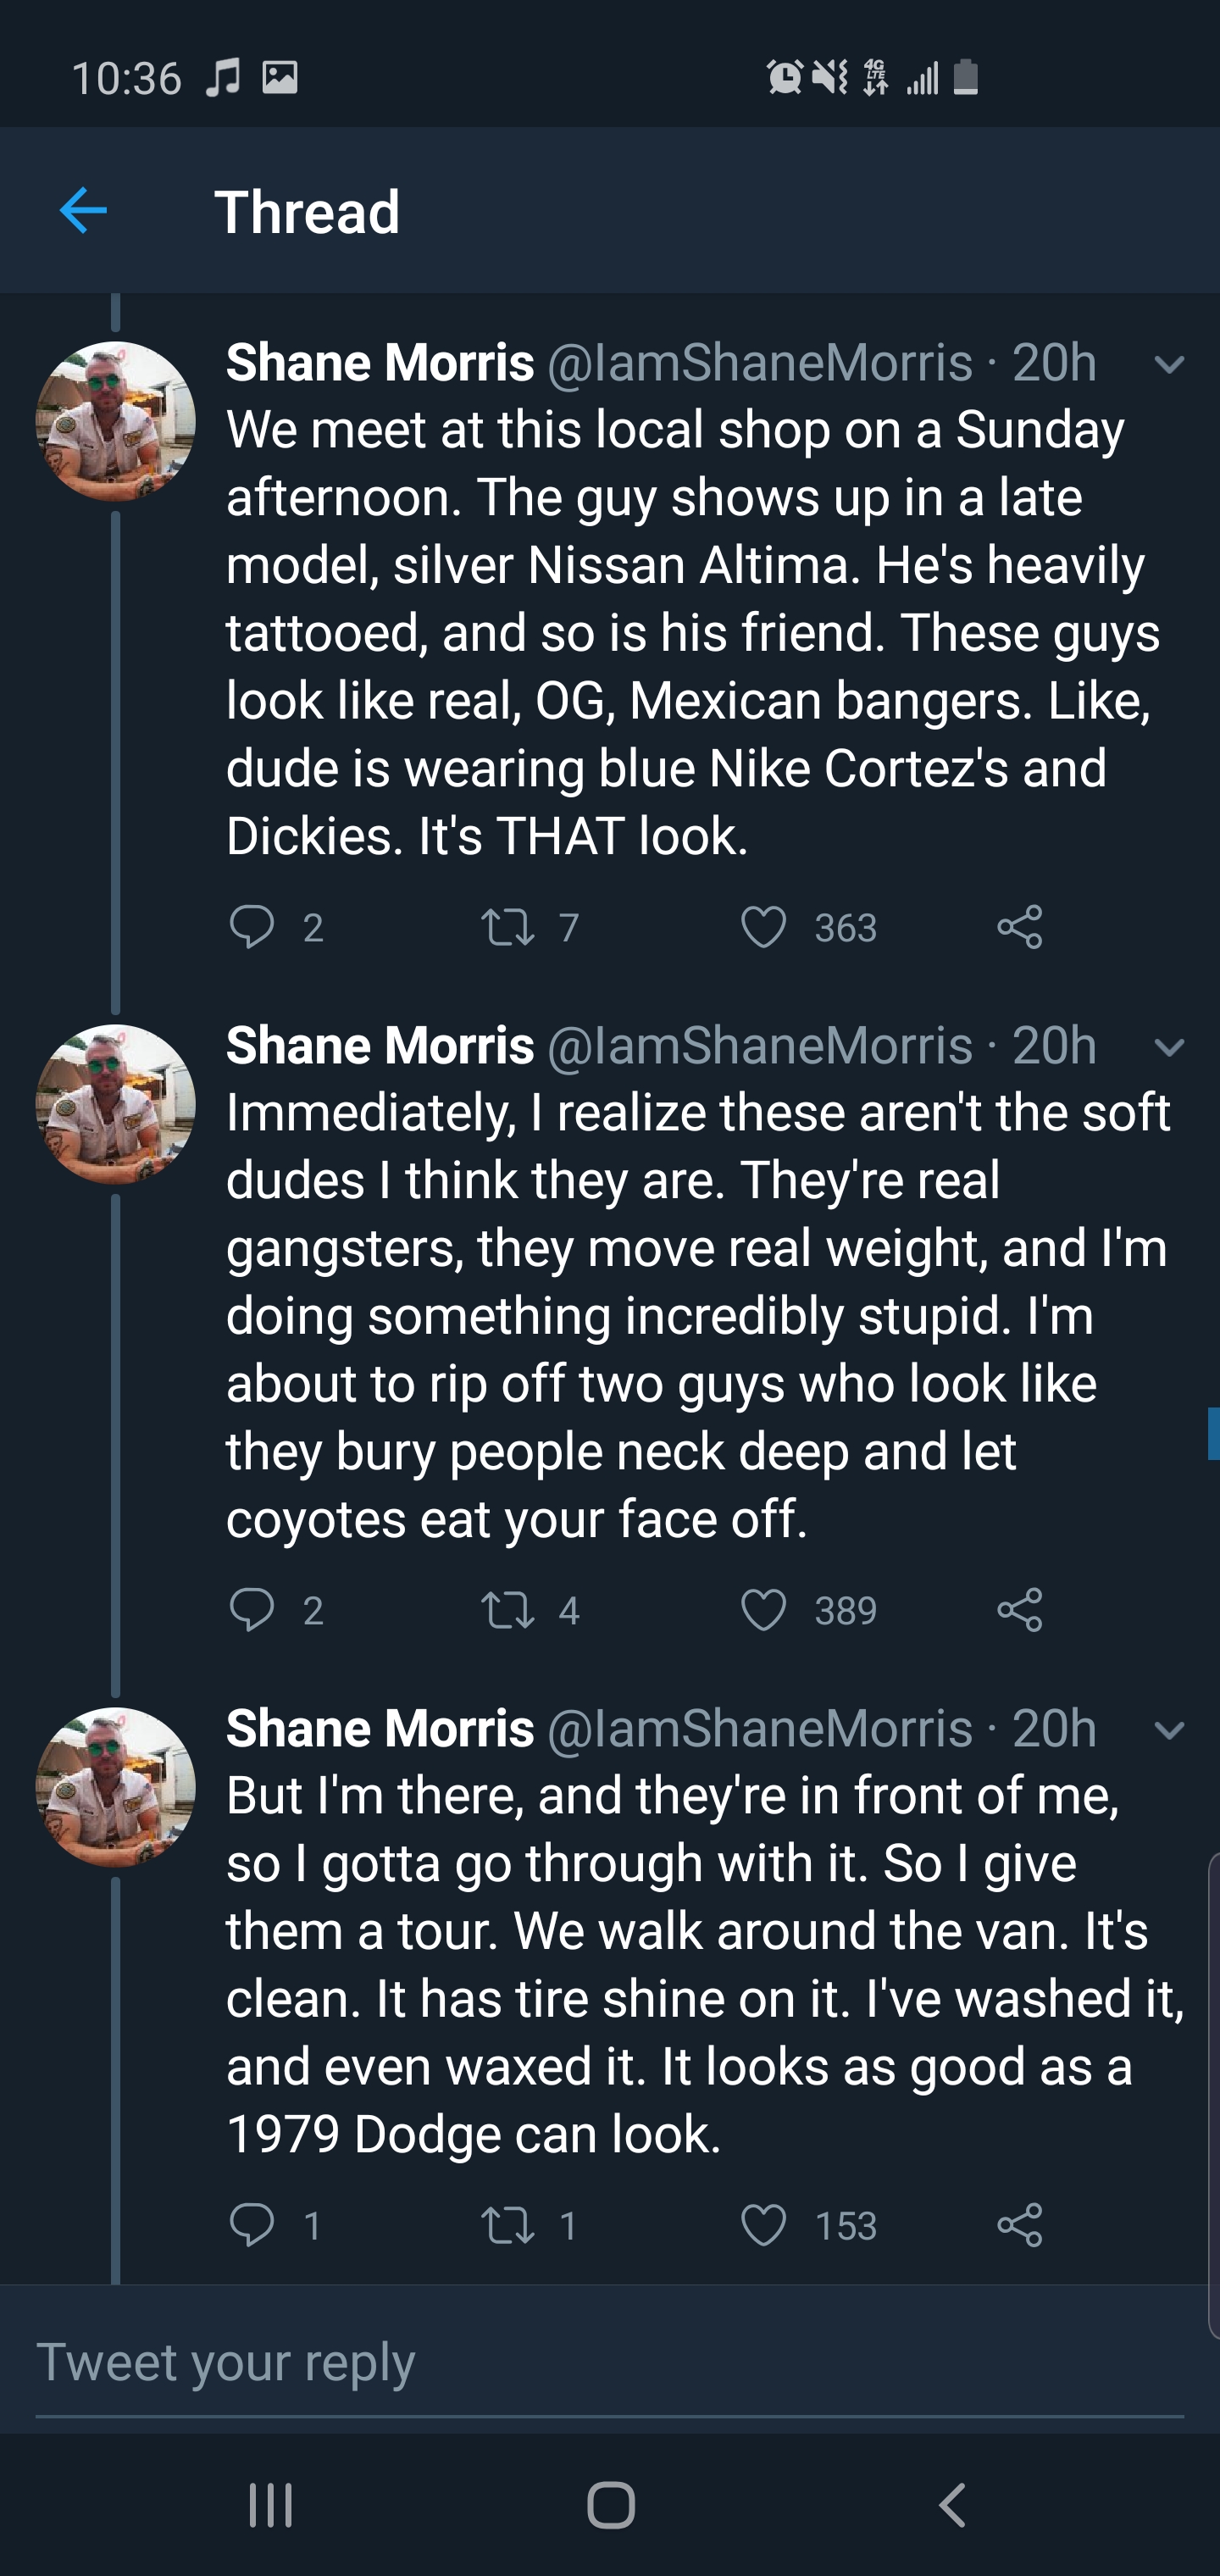 screenshot - A On Thread Shane Morris 20h We meet at this local shop on a Sunday afternoon. The guy shows up in a late model, silver Nissan Altima. He's heavily tattooed, and so is his friend. These guys look real, Og, Mexican bangers. , dude is wearing b